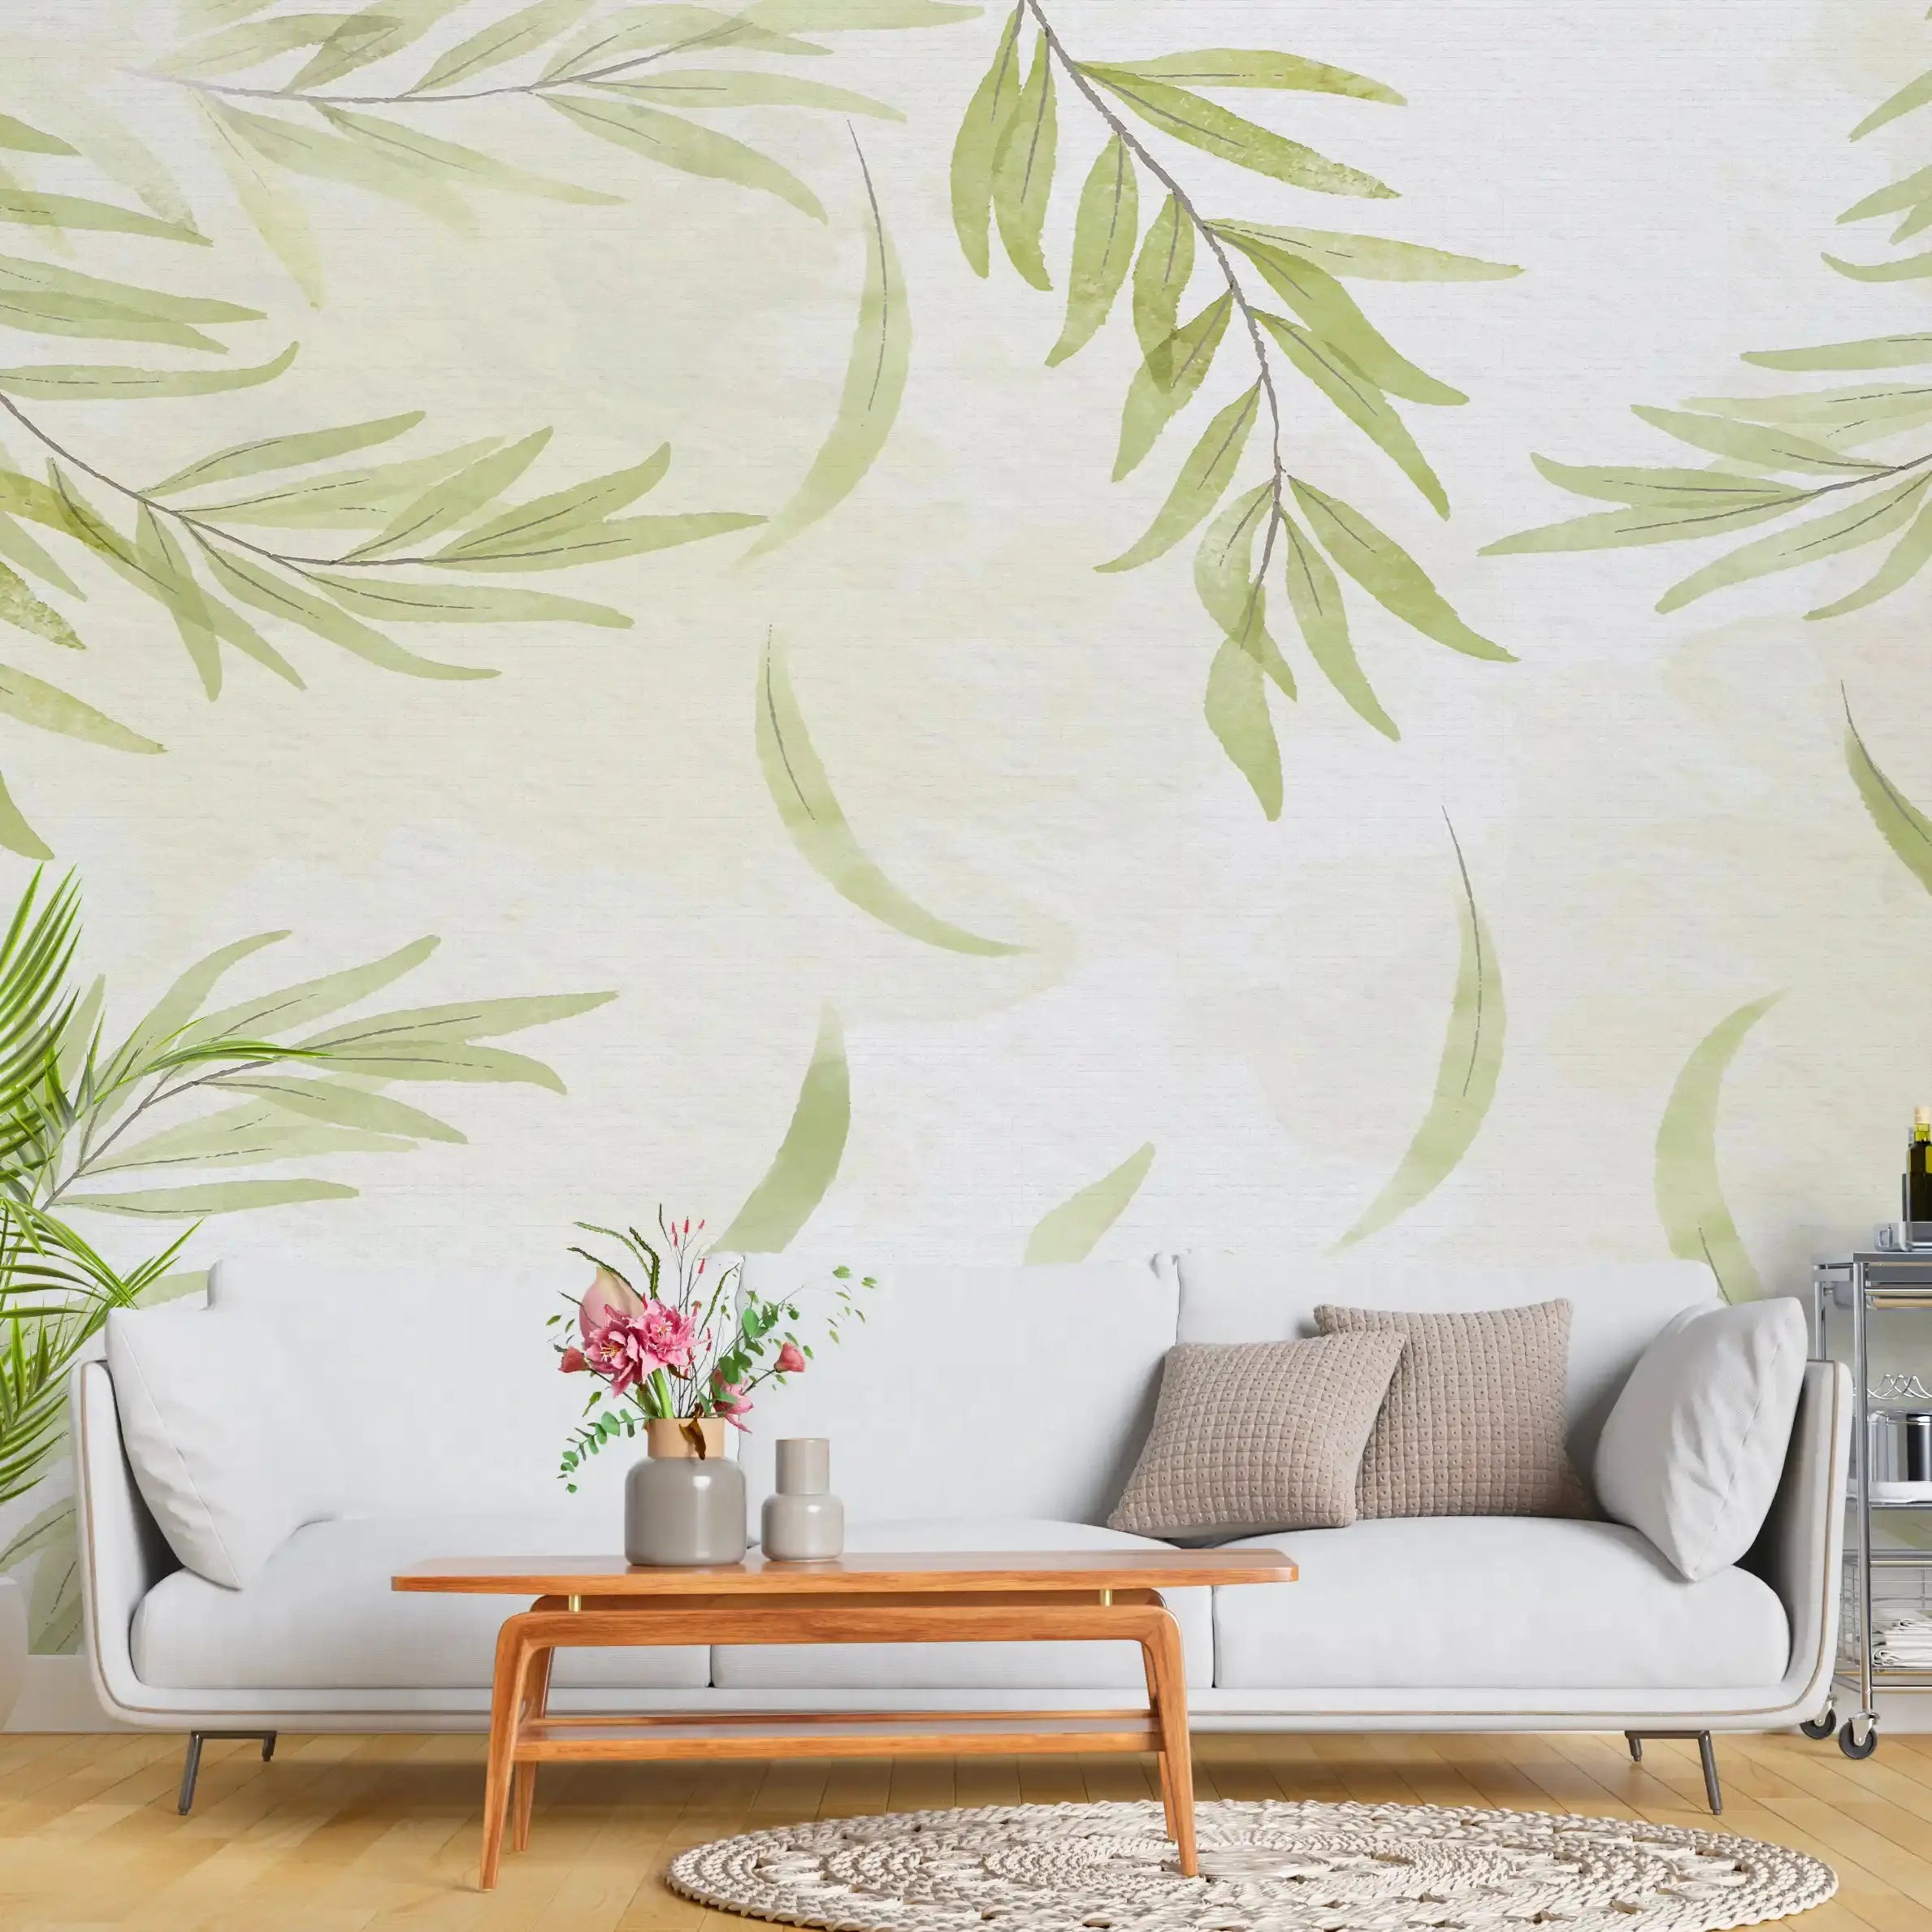 3032-A / Leaf Floral  Peel and Stick Wallpaper: Modern Boho Decor with Watercolor Branches Design, Ideal for Temporary or Renters Wallpaper - Artevella